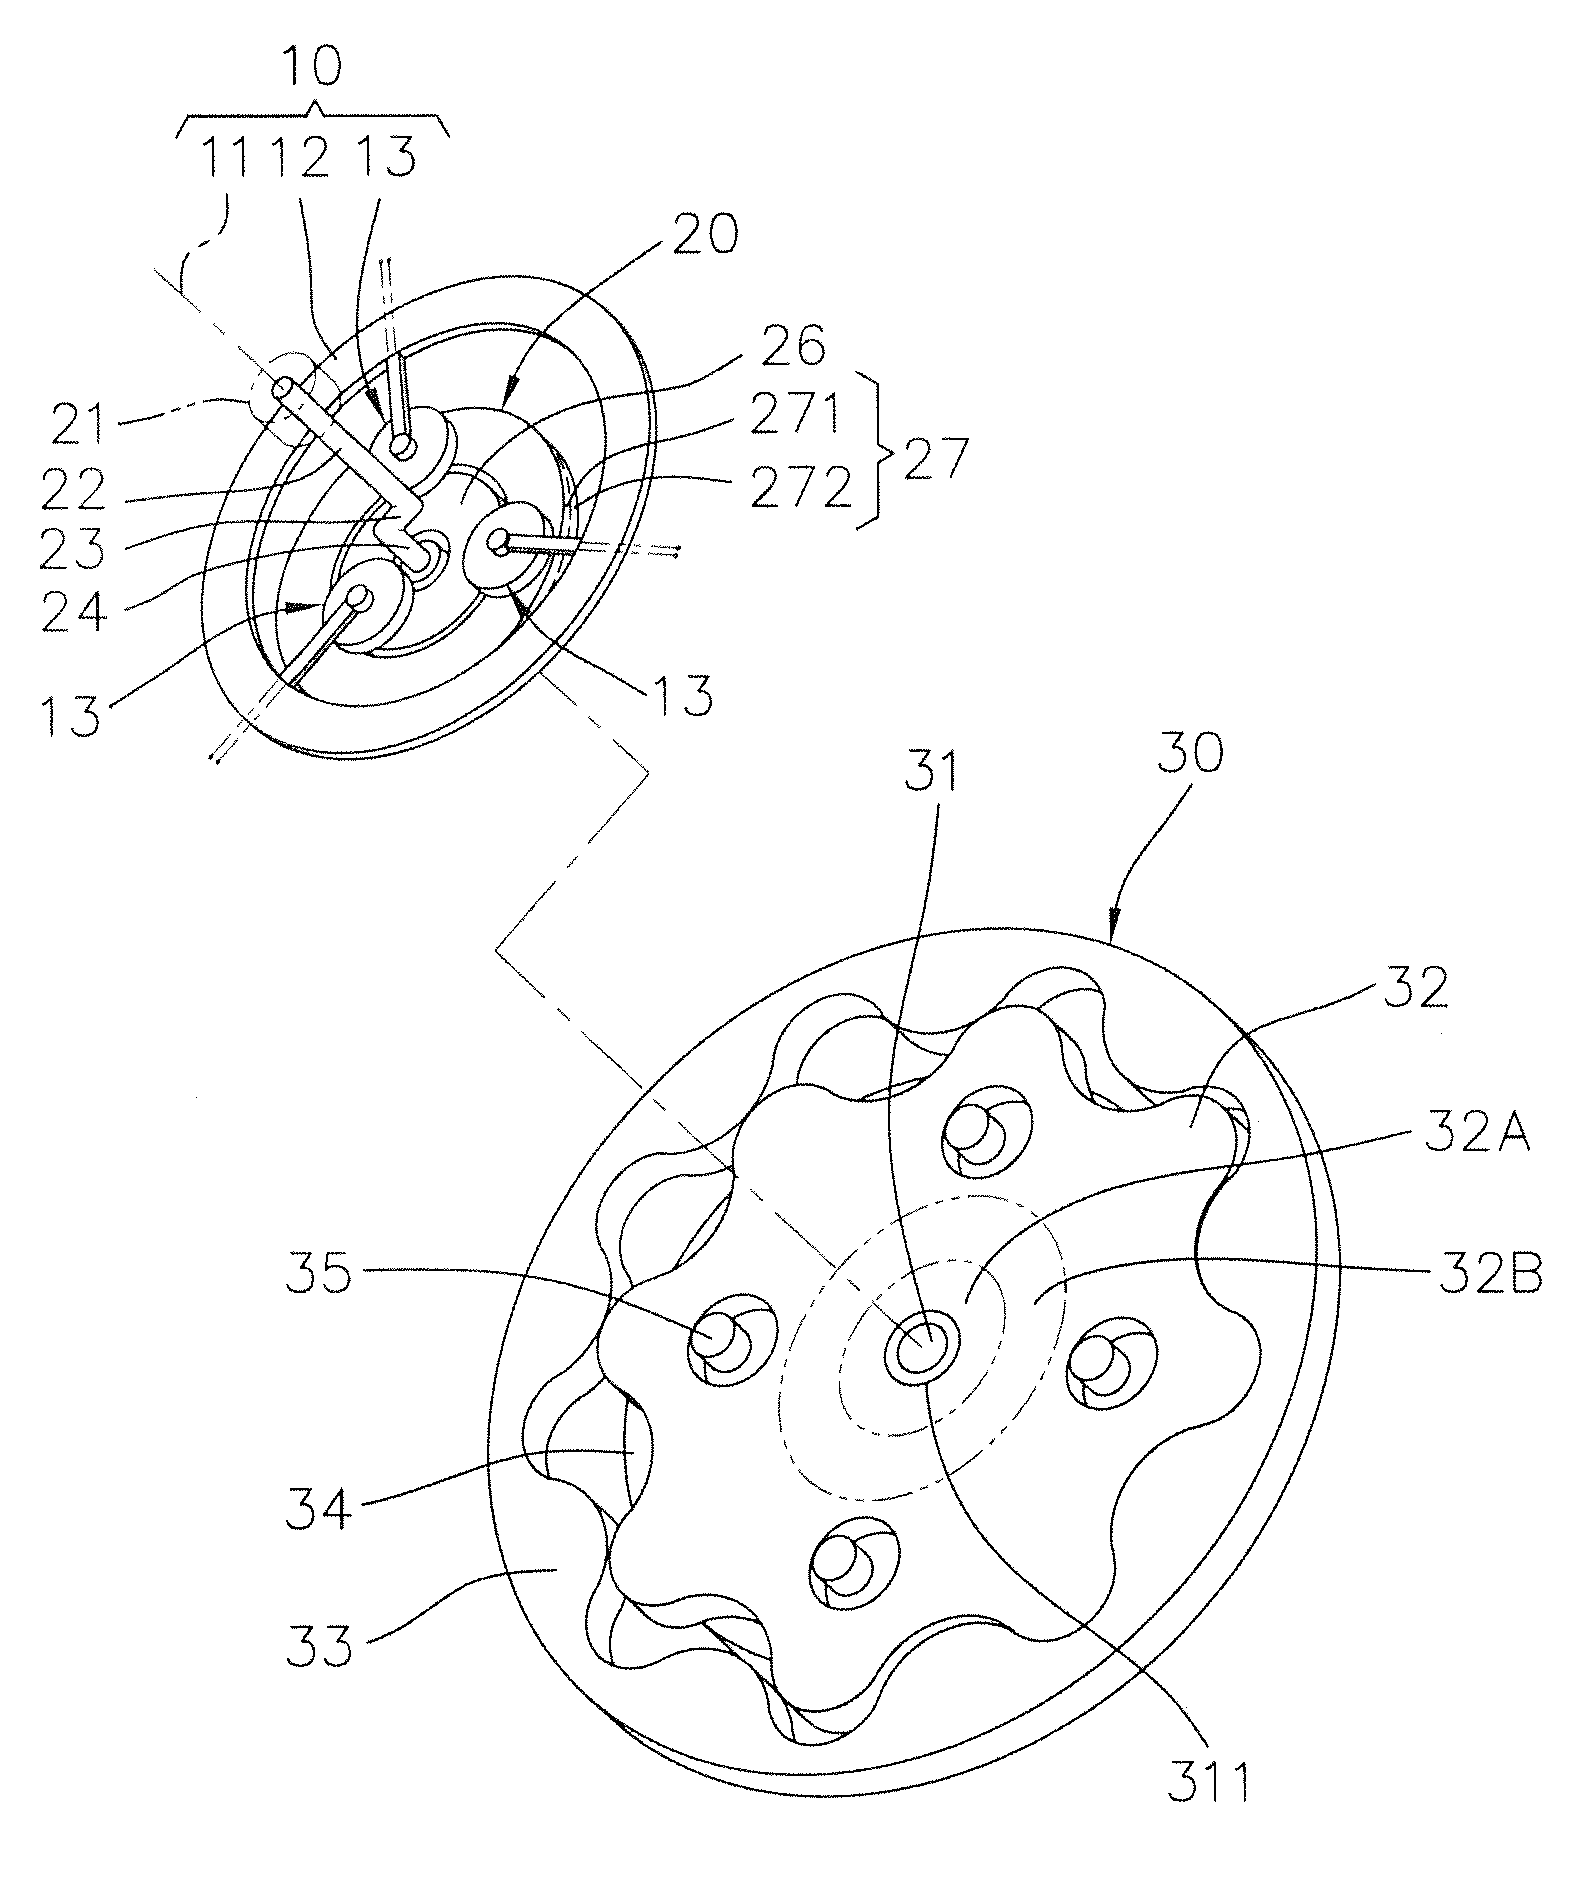 Energy converting device having an eccentric rotor